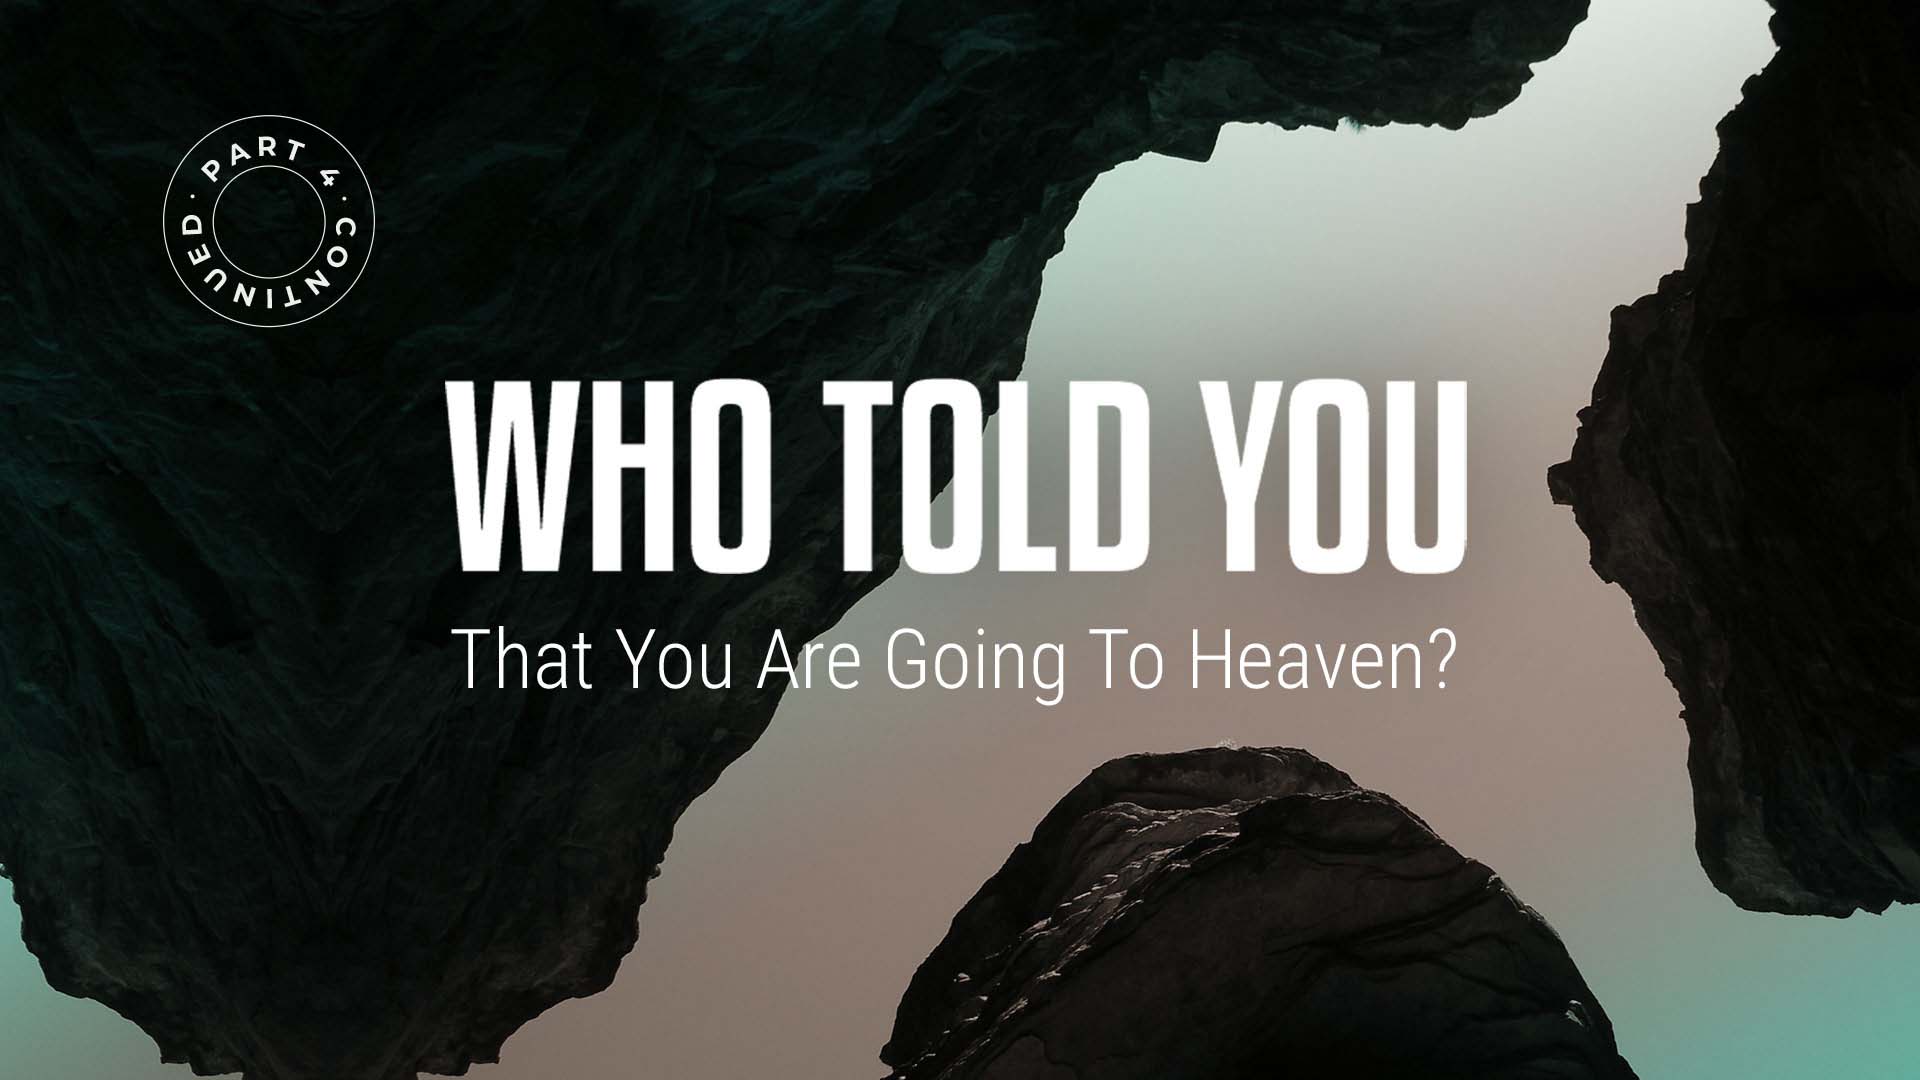 Who Told You That You Are Going To Heaven? – Part 4 Continued